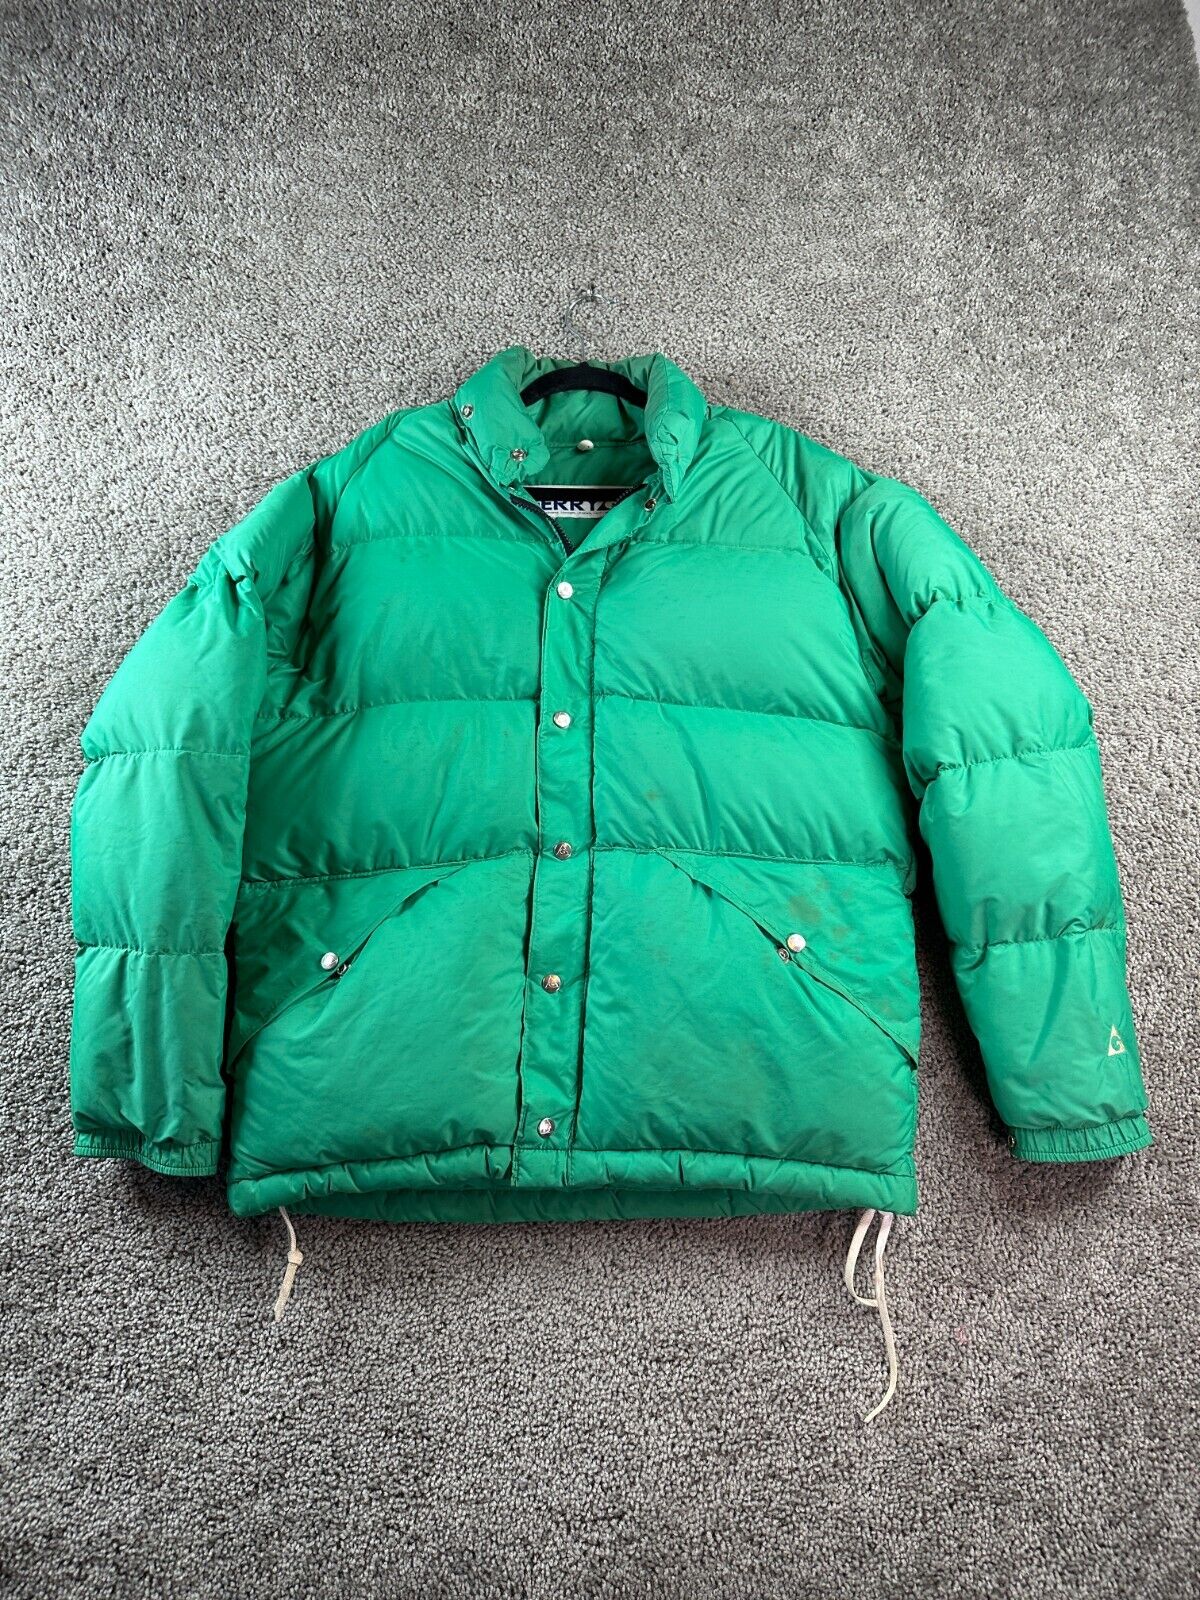 VINTAGE 70s GERRY Goose Down Jacket Mens Large Green USA Made Puffer Coat *